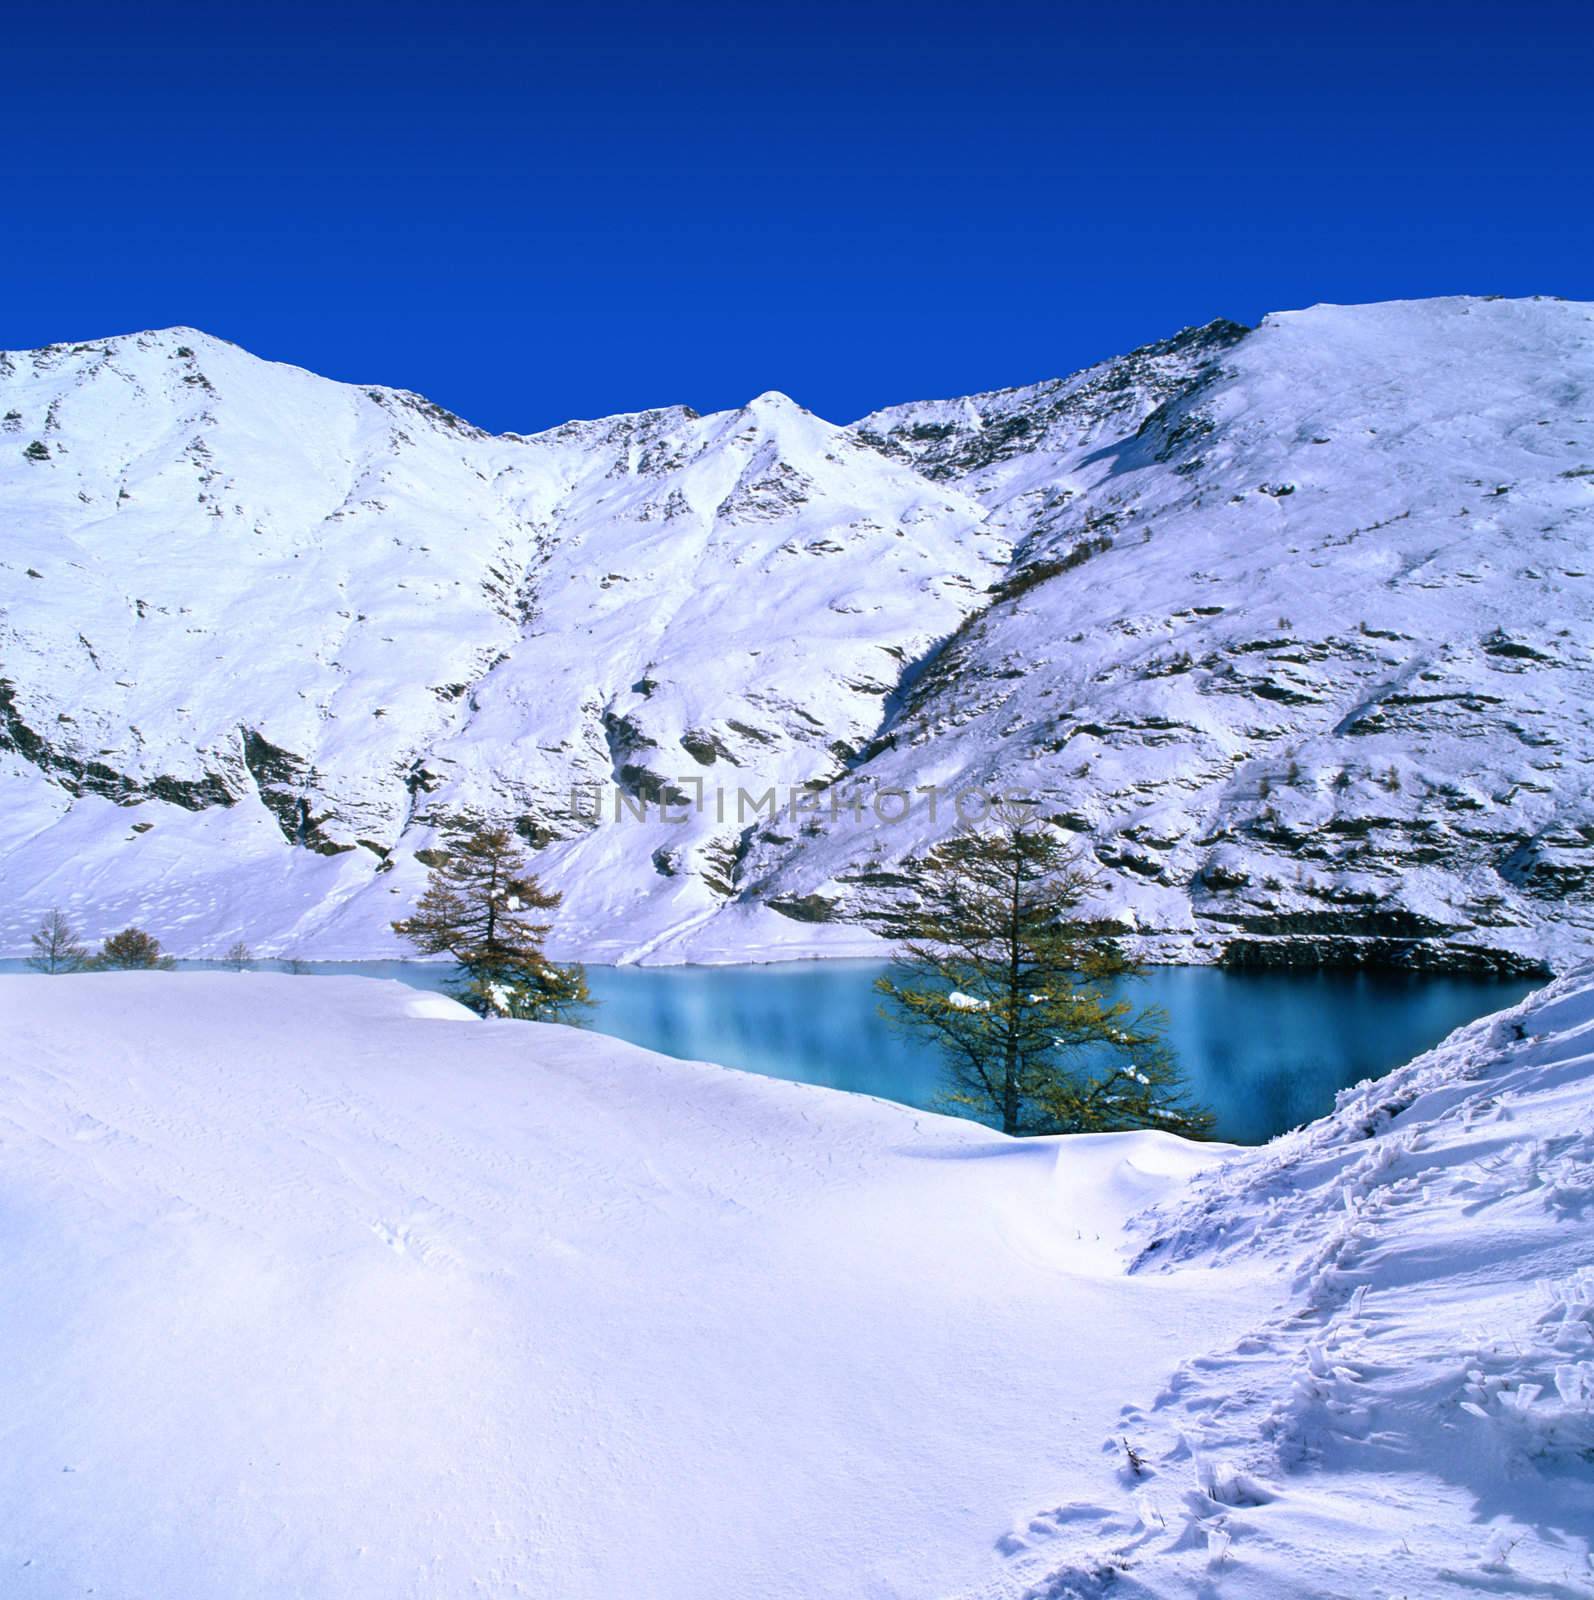 Snow covered mountains with a blue sky and azure lake